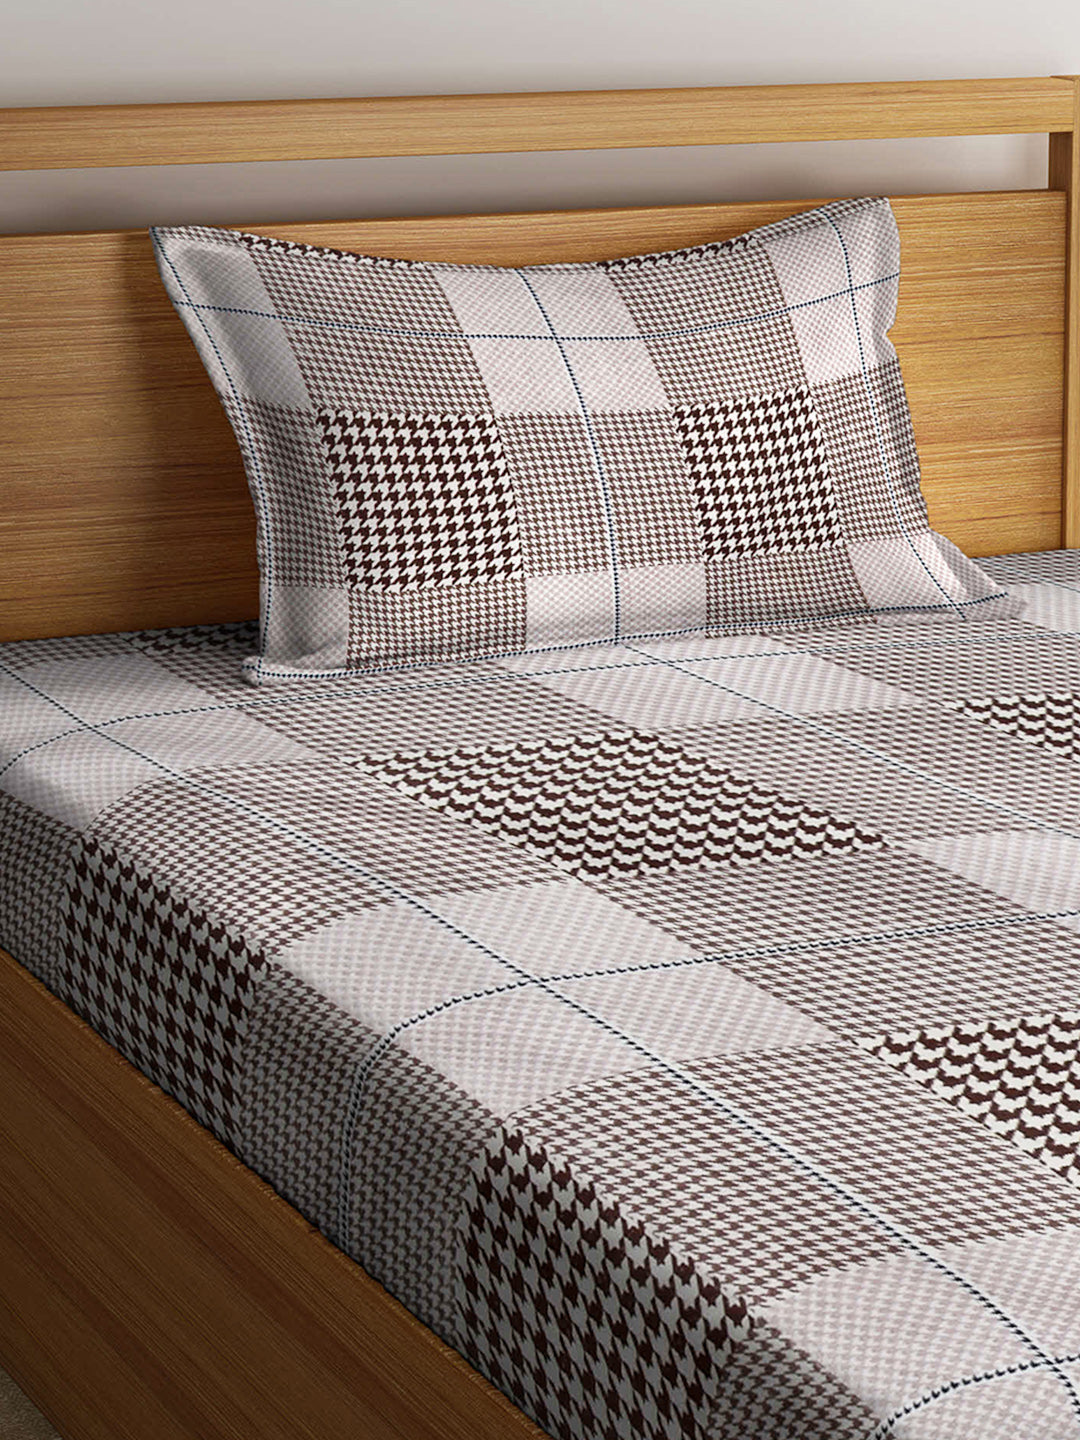 Arrabi Beige Checks TC Cotton Blend Single Size Fitted Bedsheet with 1 Pillow Cover (220 X 150 cm)